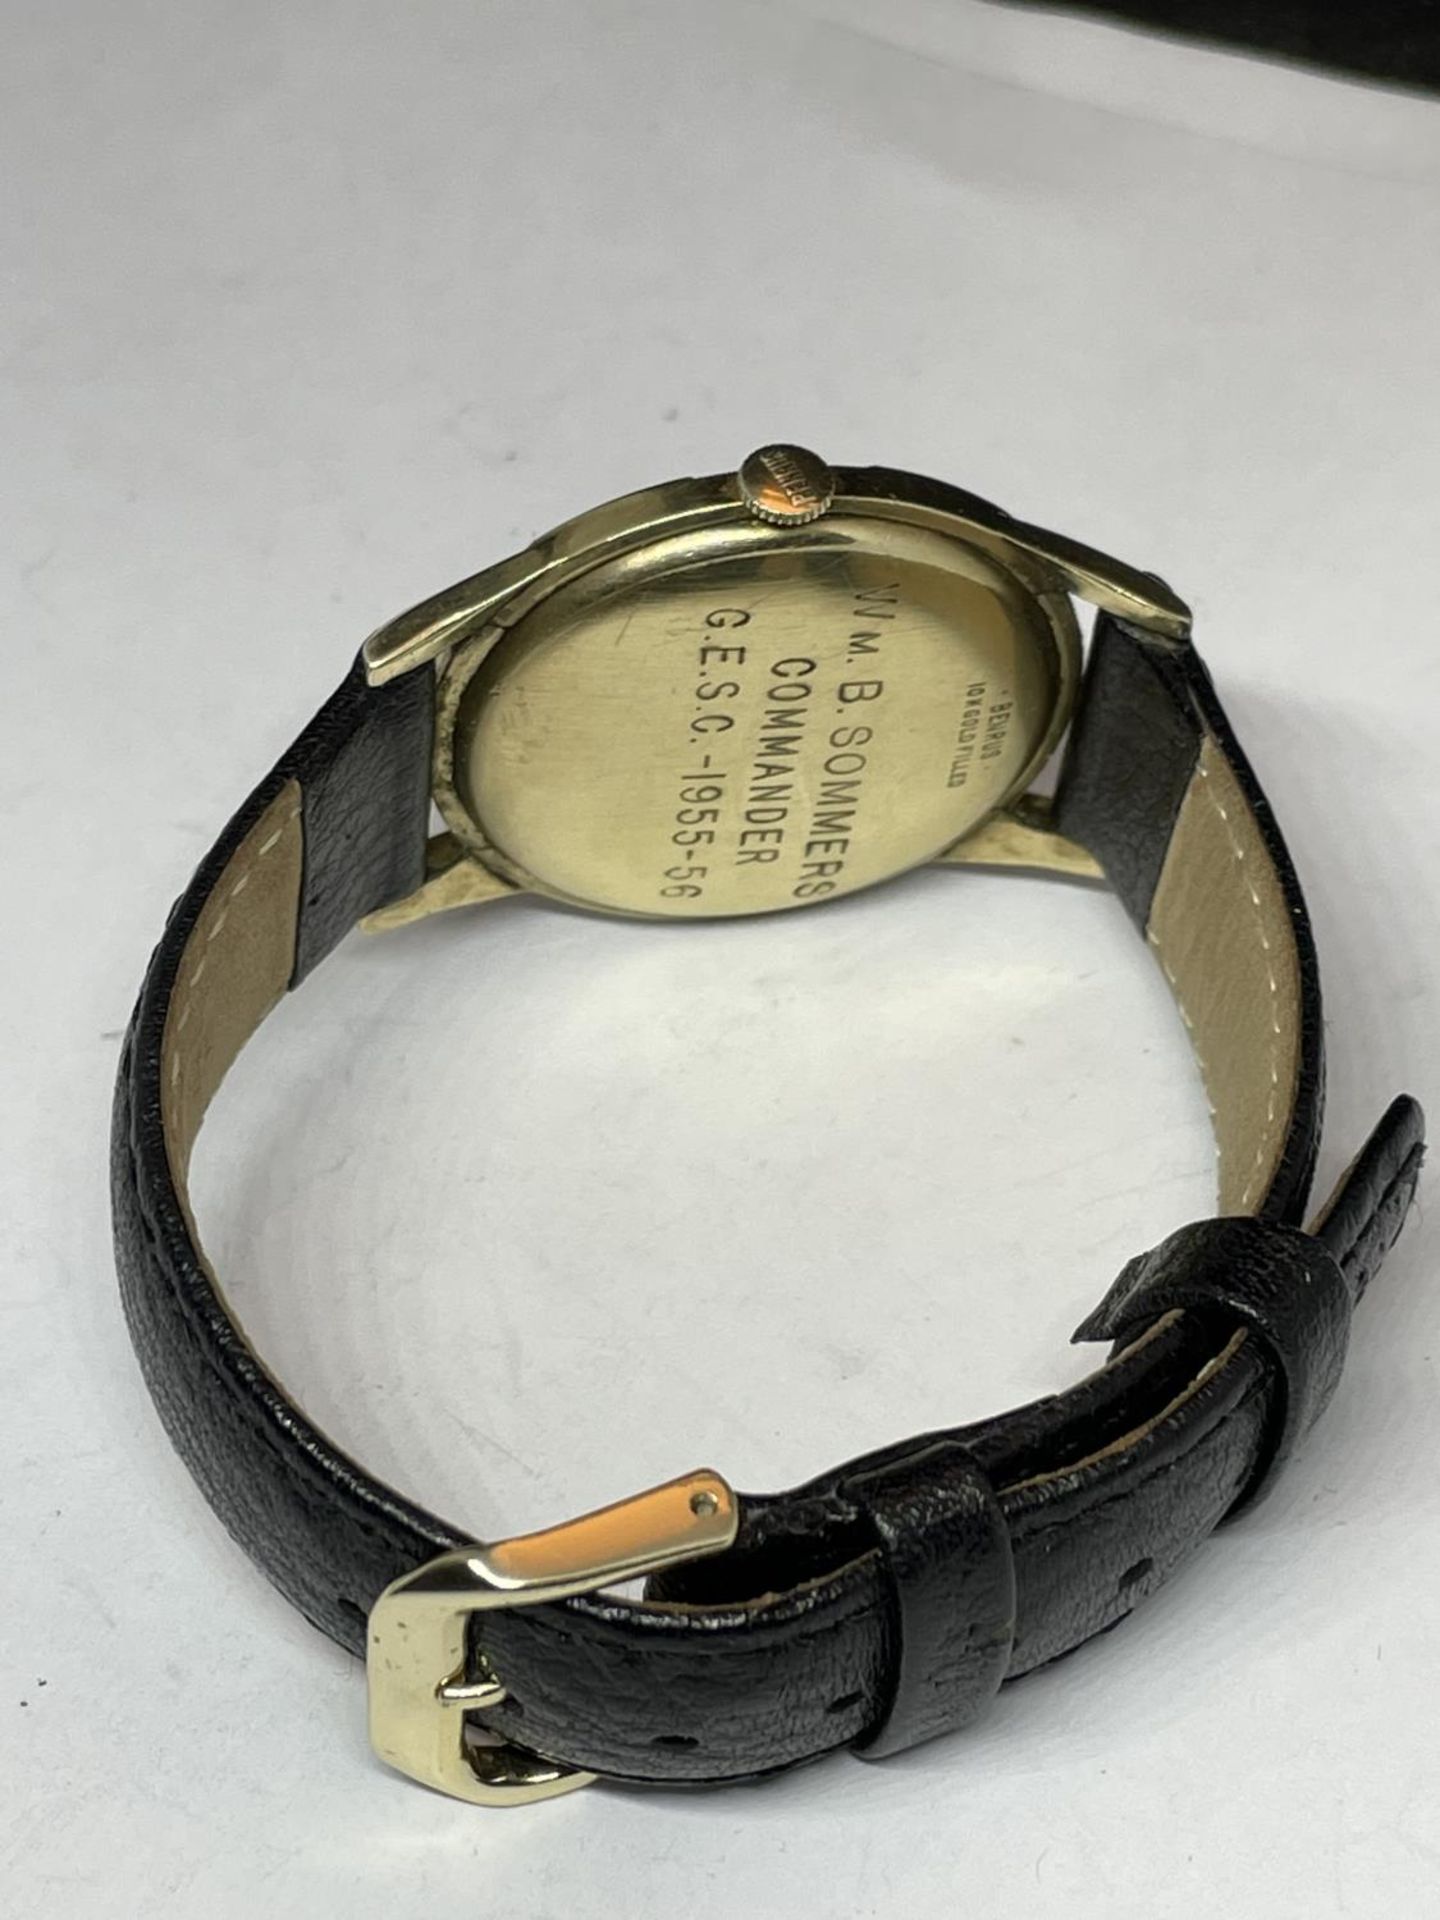 A BENRUS VINTAGE SUB DIAL WRIST WATCH SEEN WORKING BUT NO WARRANTY ENGRAVED - Image 6 of 9